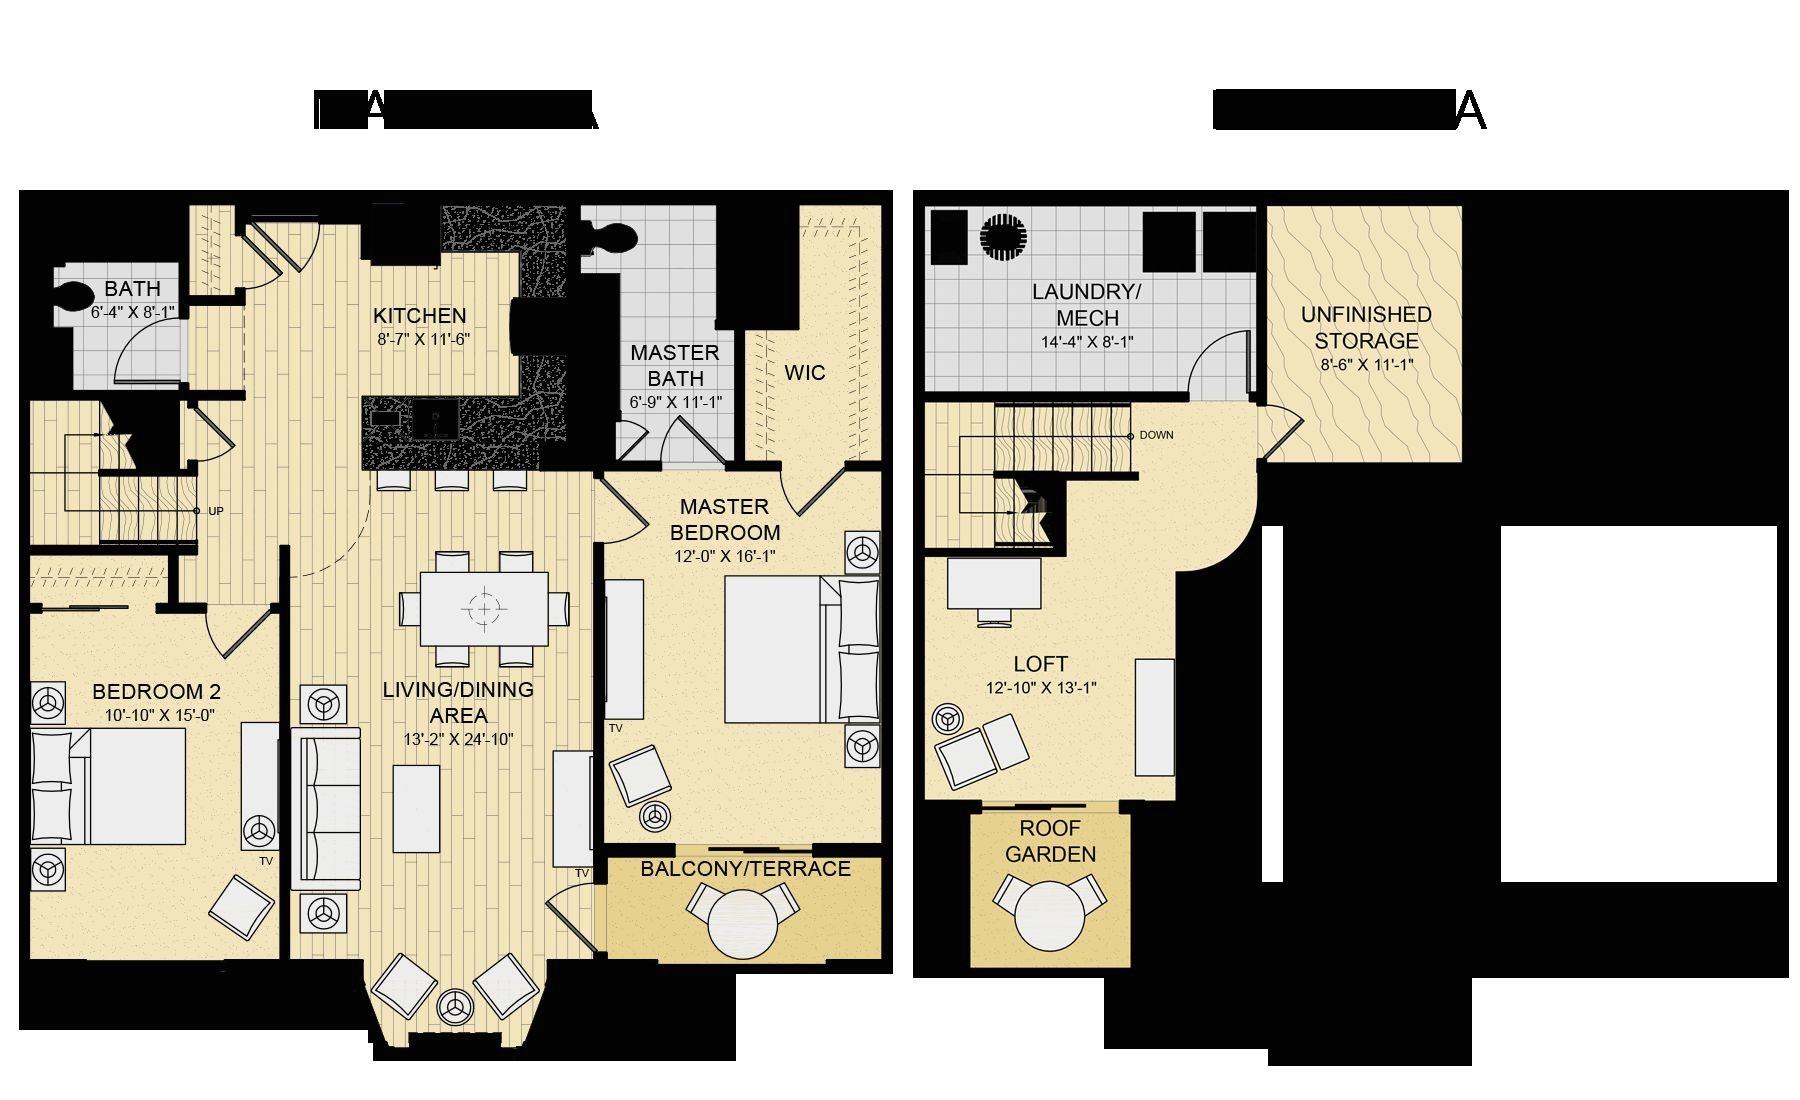 2 bedroom house plans with loft